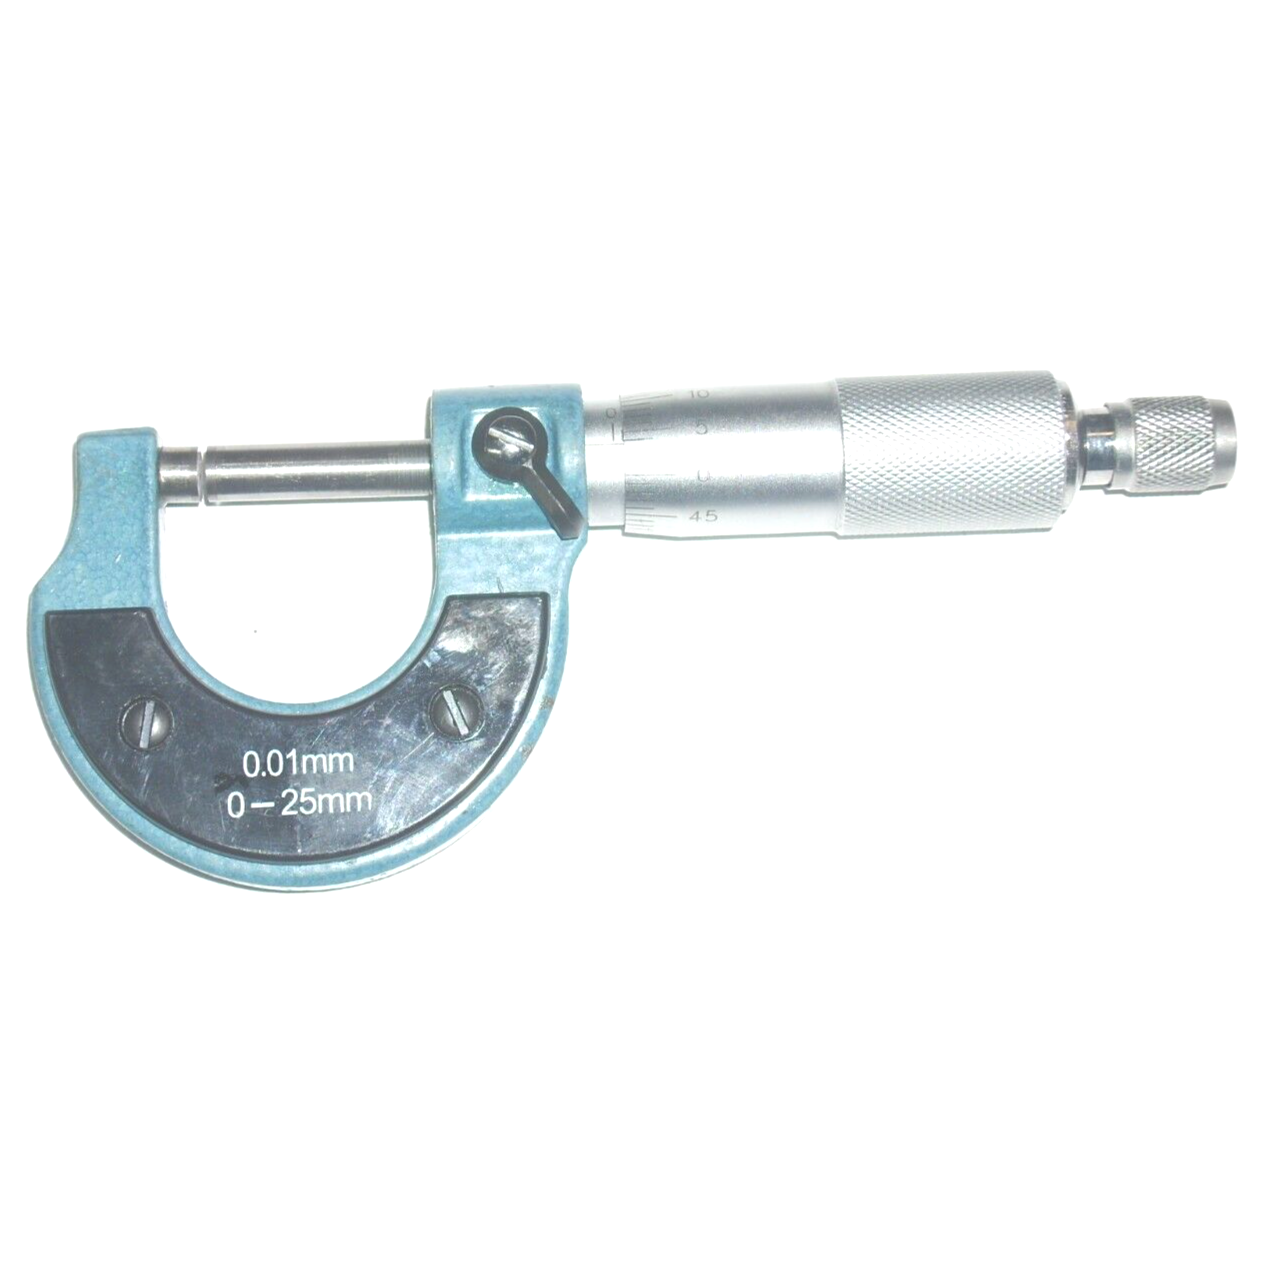 Outside Micrometer Measures Diameter Thickness 0-25mm